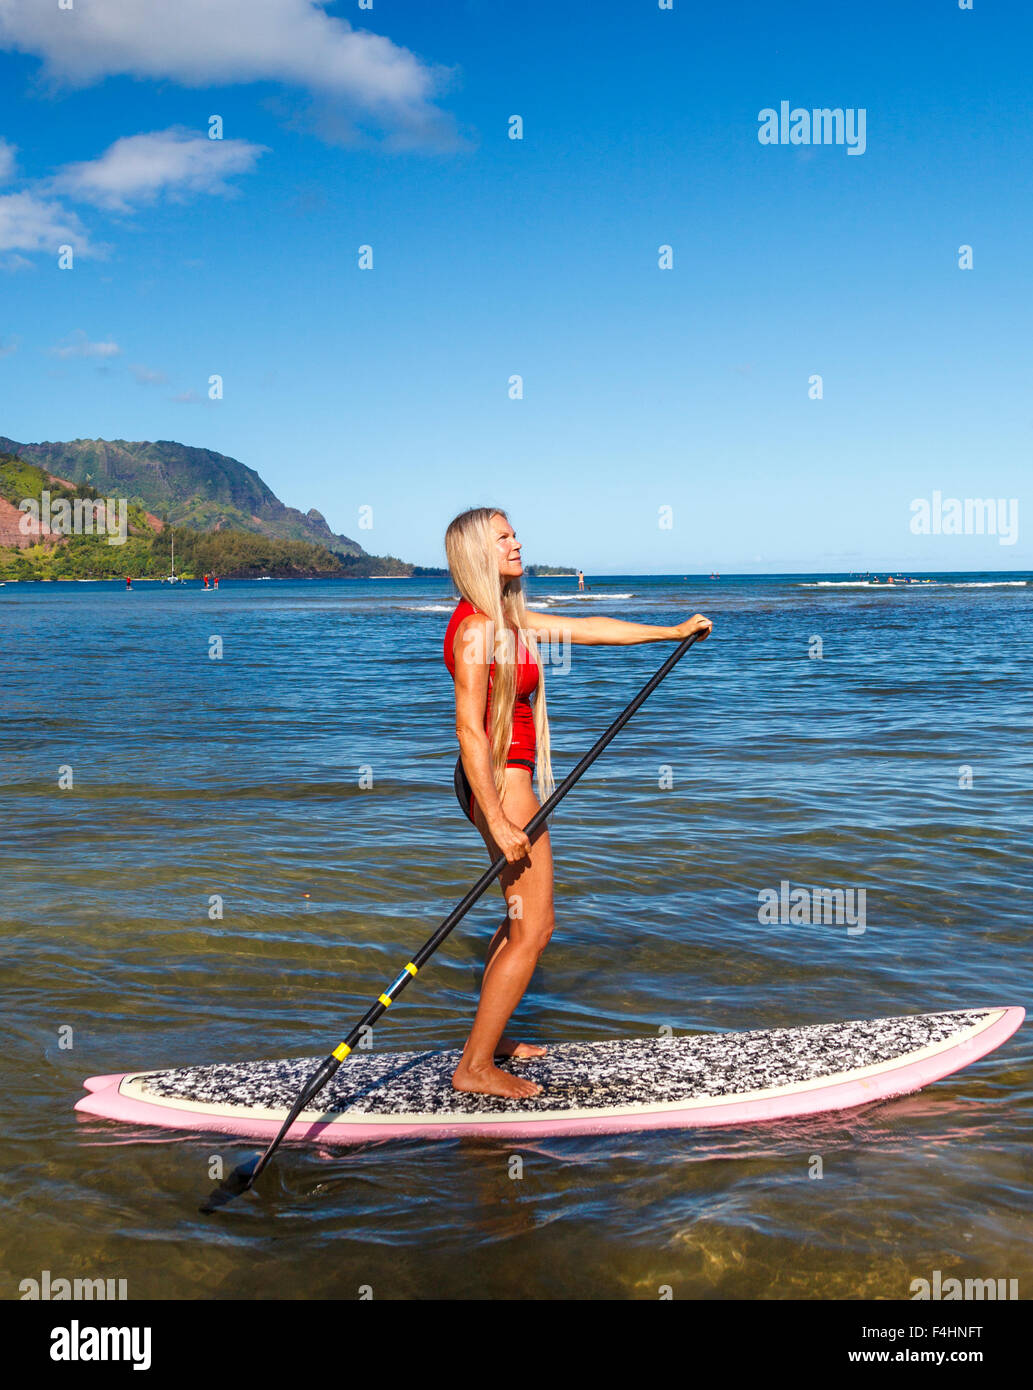 Woman stand up paddling in Hanalei Bay, with Mt. Makana, called Bali Hai, in distance Stock Photo